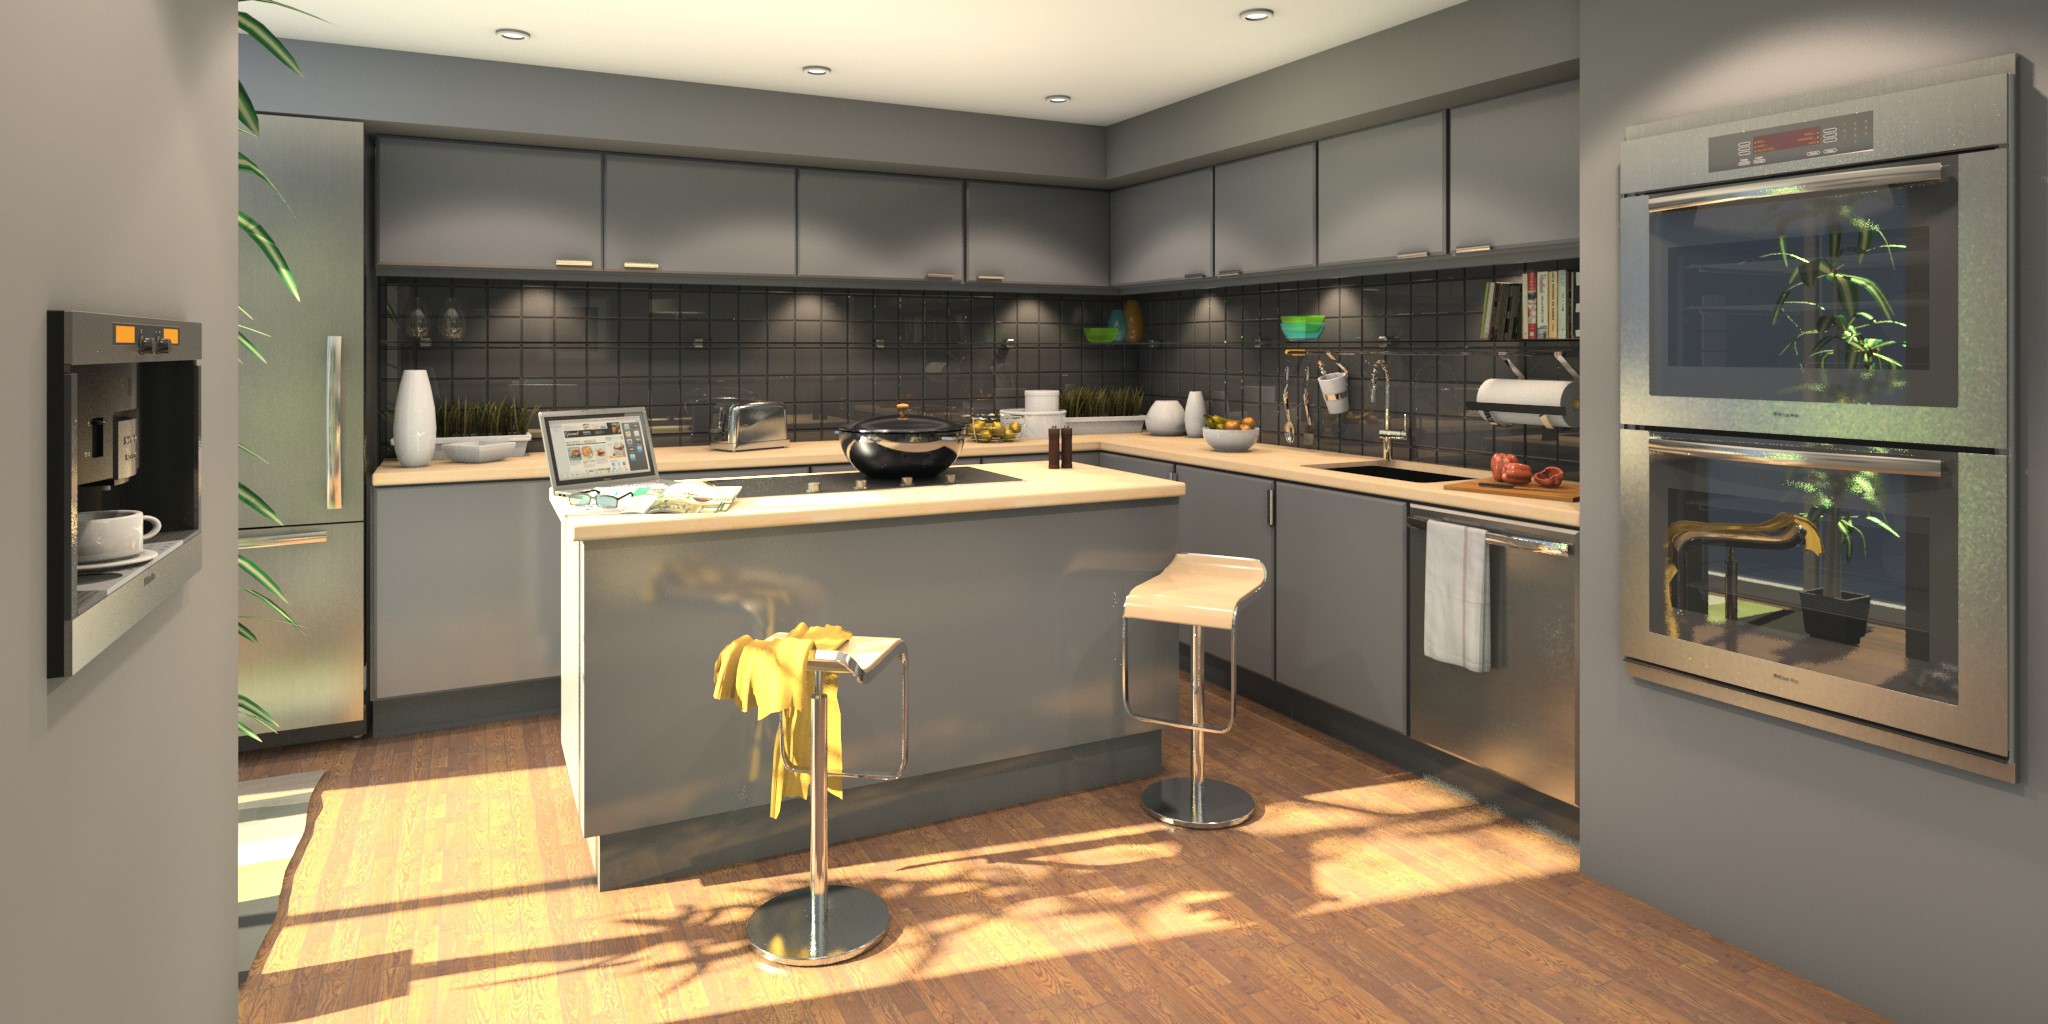 With a 2020 Ideal Spaces online space planning tool the customer can assemble their kitchen and, through lifelike renderings and 3600 panoramas, get an exact idea of what their dream project will look